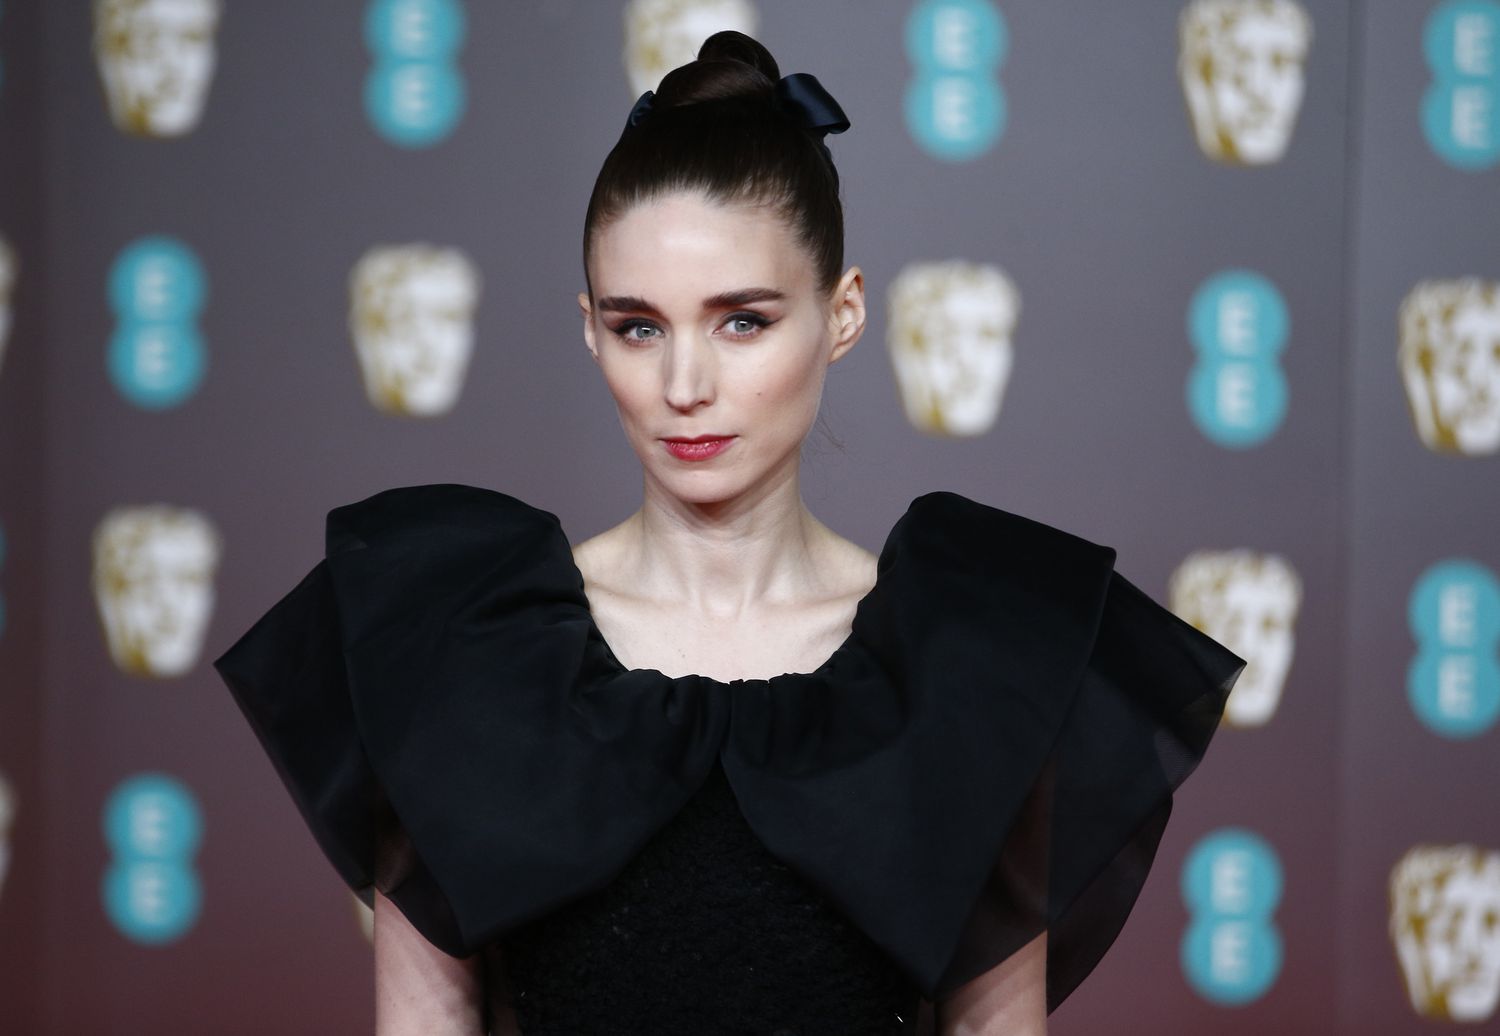 Rooney Mara arrives at the British Academy of Film and Television Awards (BAFTA) at the Royal Albert Hall in London, Britain, February 2, 2020. REUTERS/Henry Nicholls